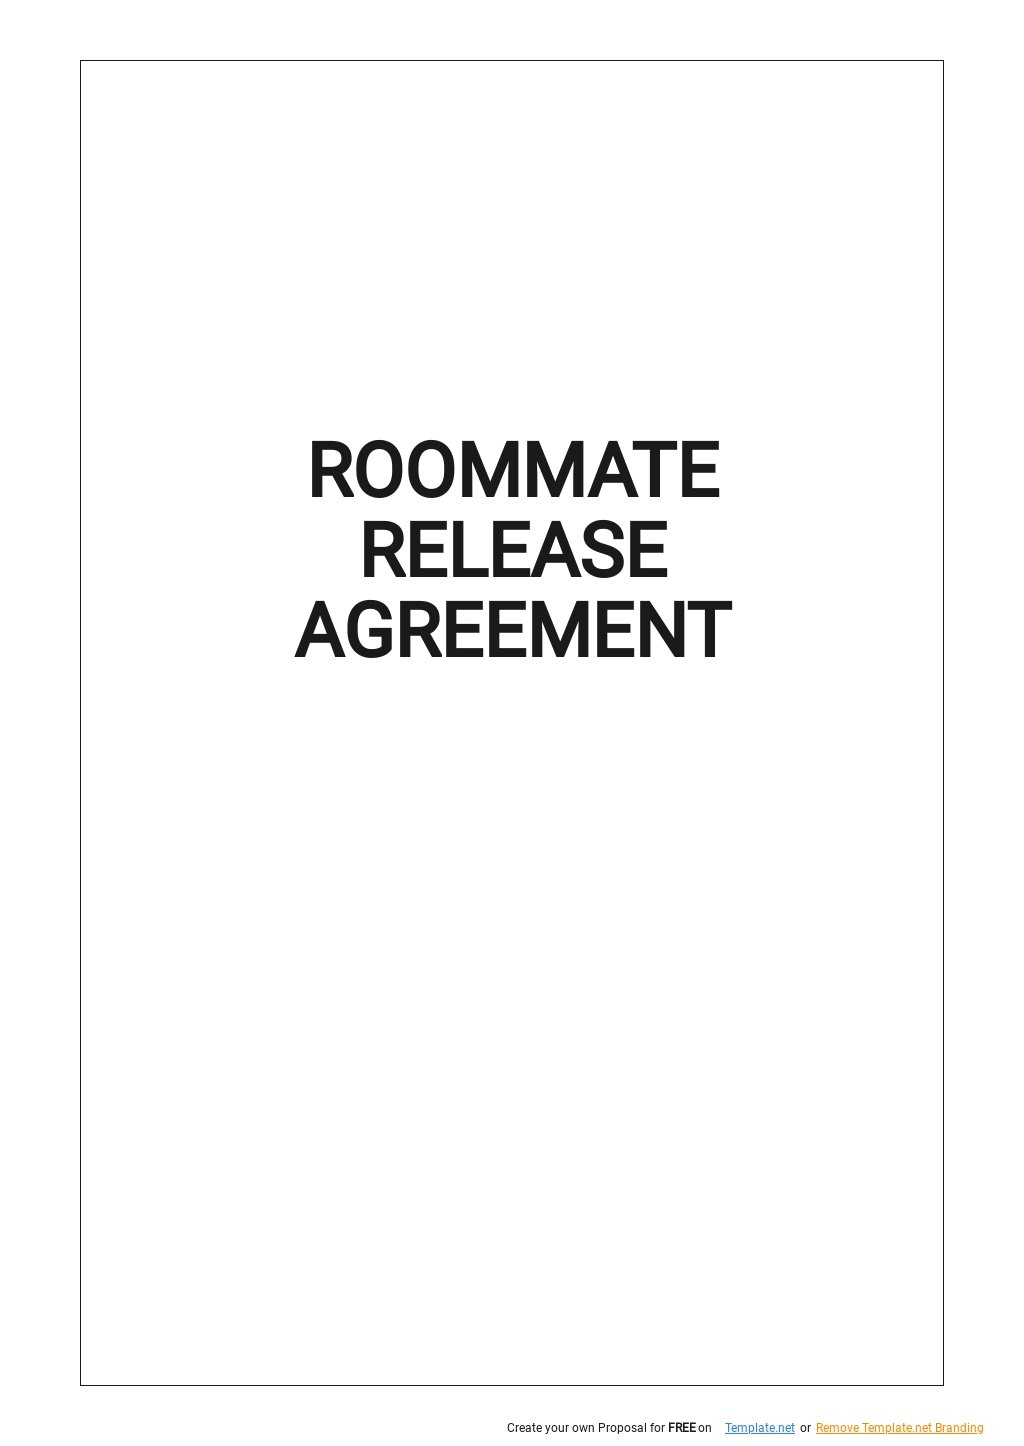 Roommate Release Agreement Template.jpe